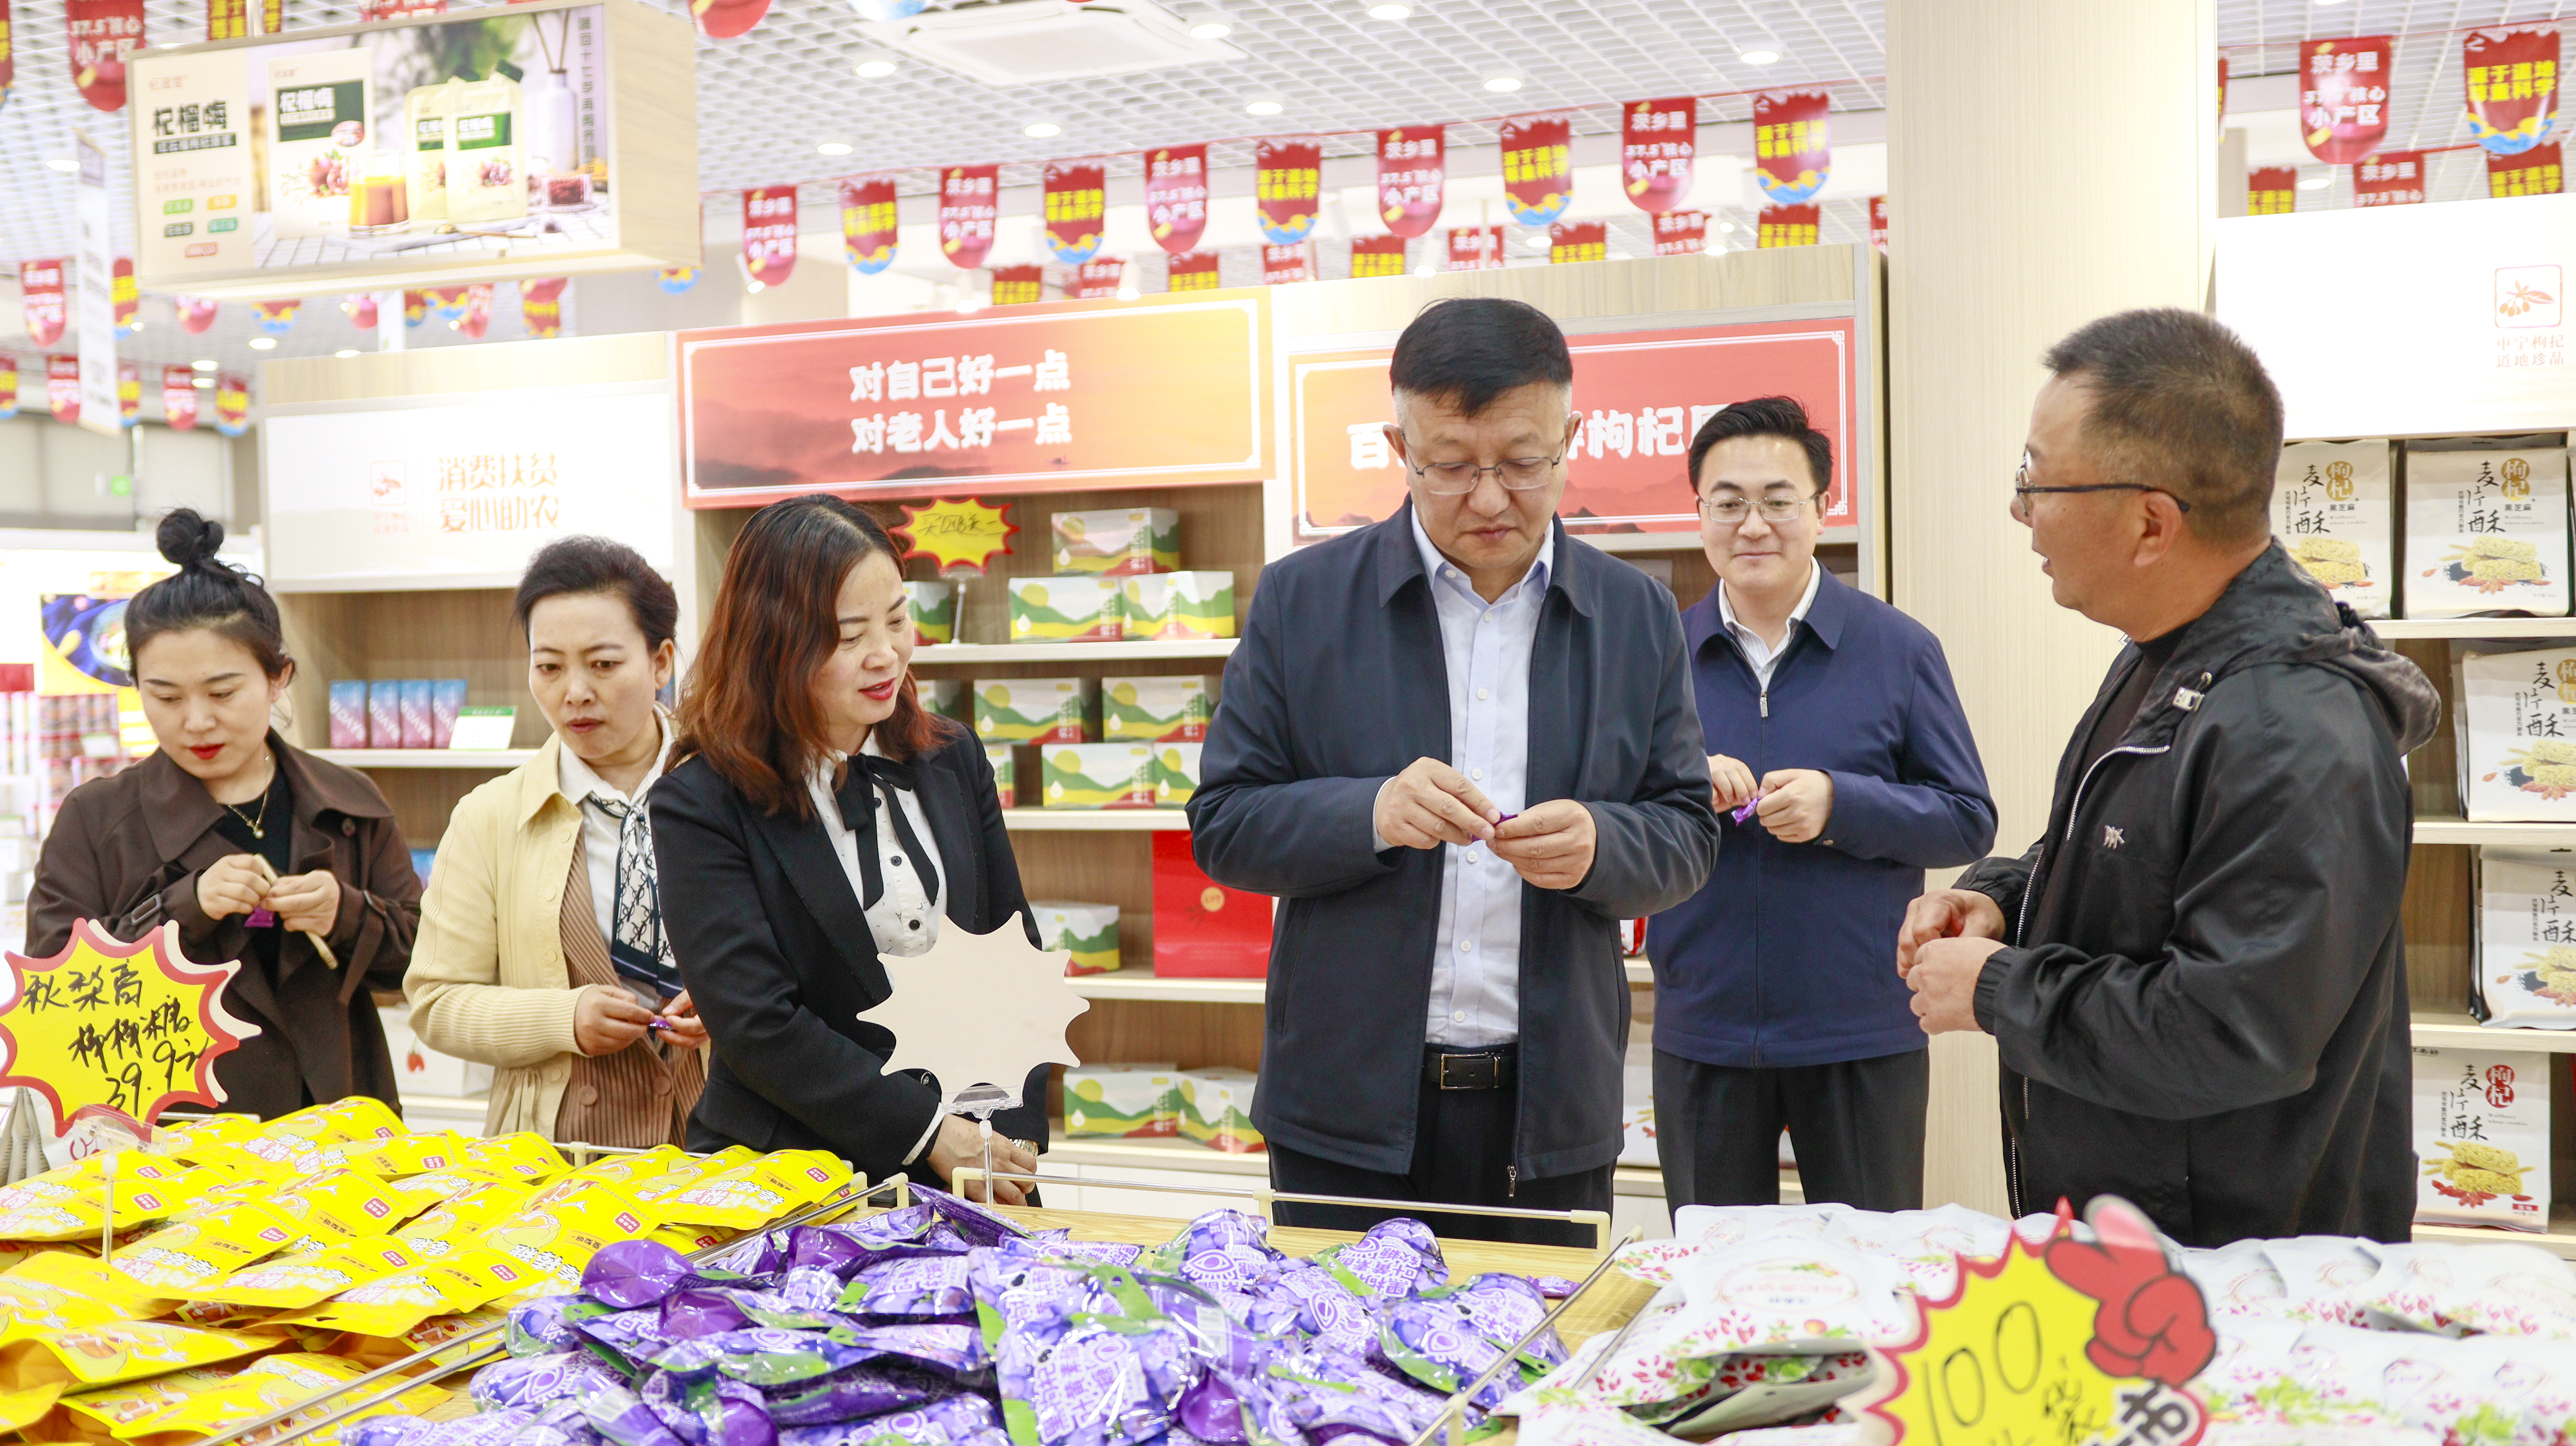 Haiyuan County Party Secretary and his party came to investigate and visit!